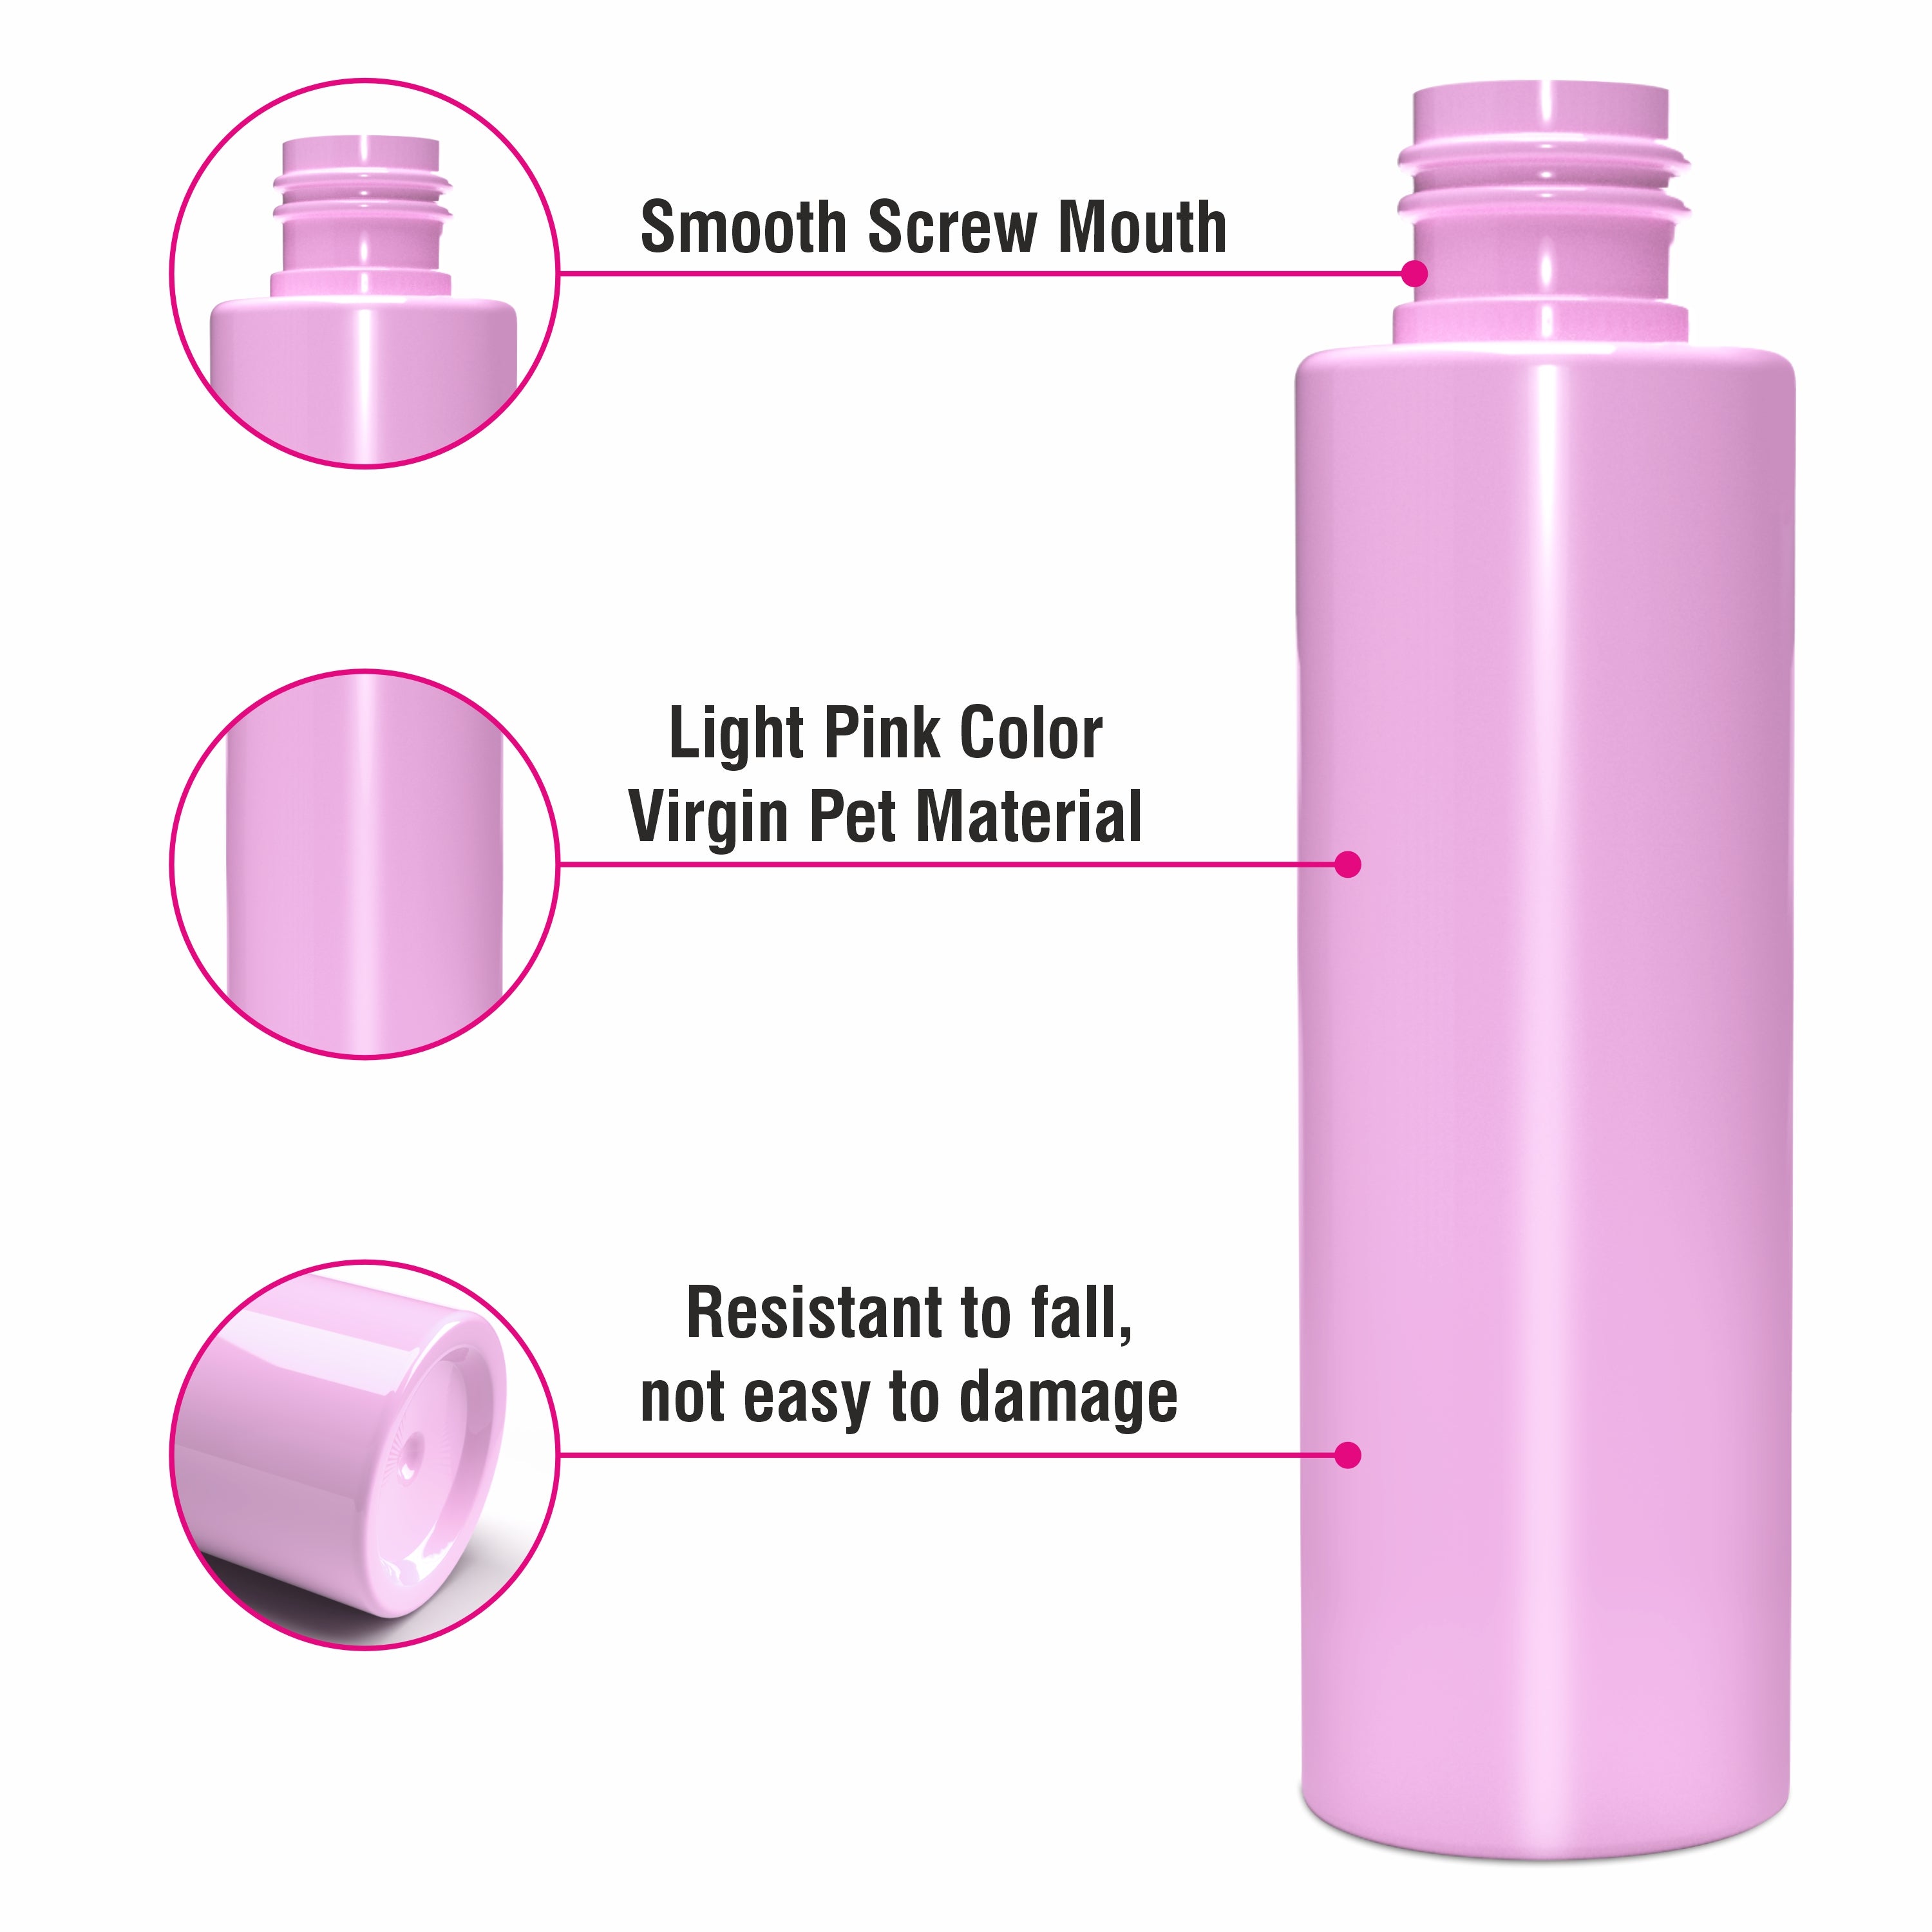 |ZMP04| LIGHT PINK ROUND SHAPE FLAT SHOULDER PET BOTTLE WITH GOLD PLATED ROUND DOME CAP Available Size: 200ml